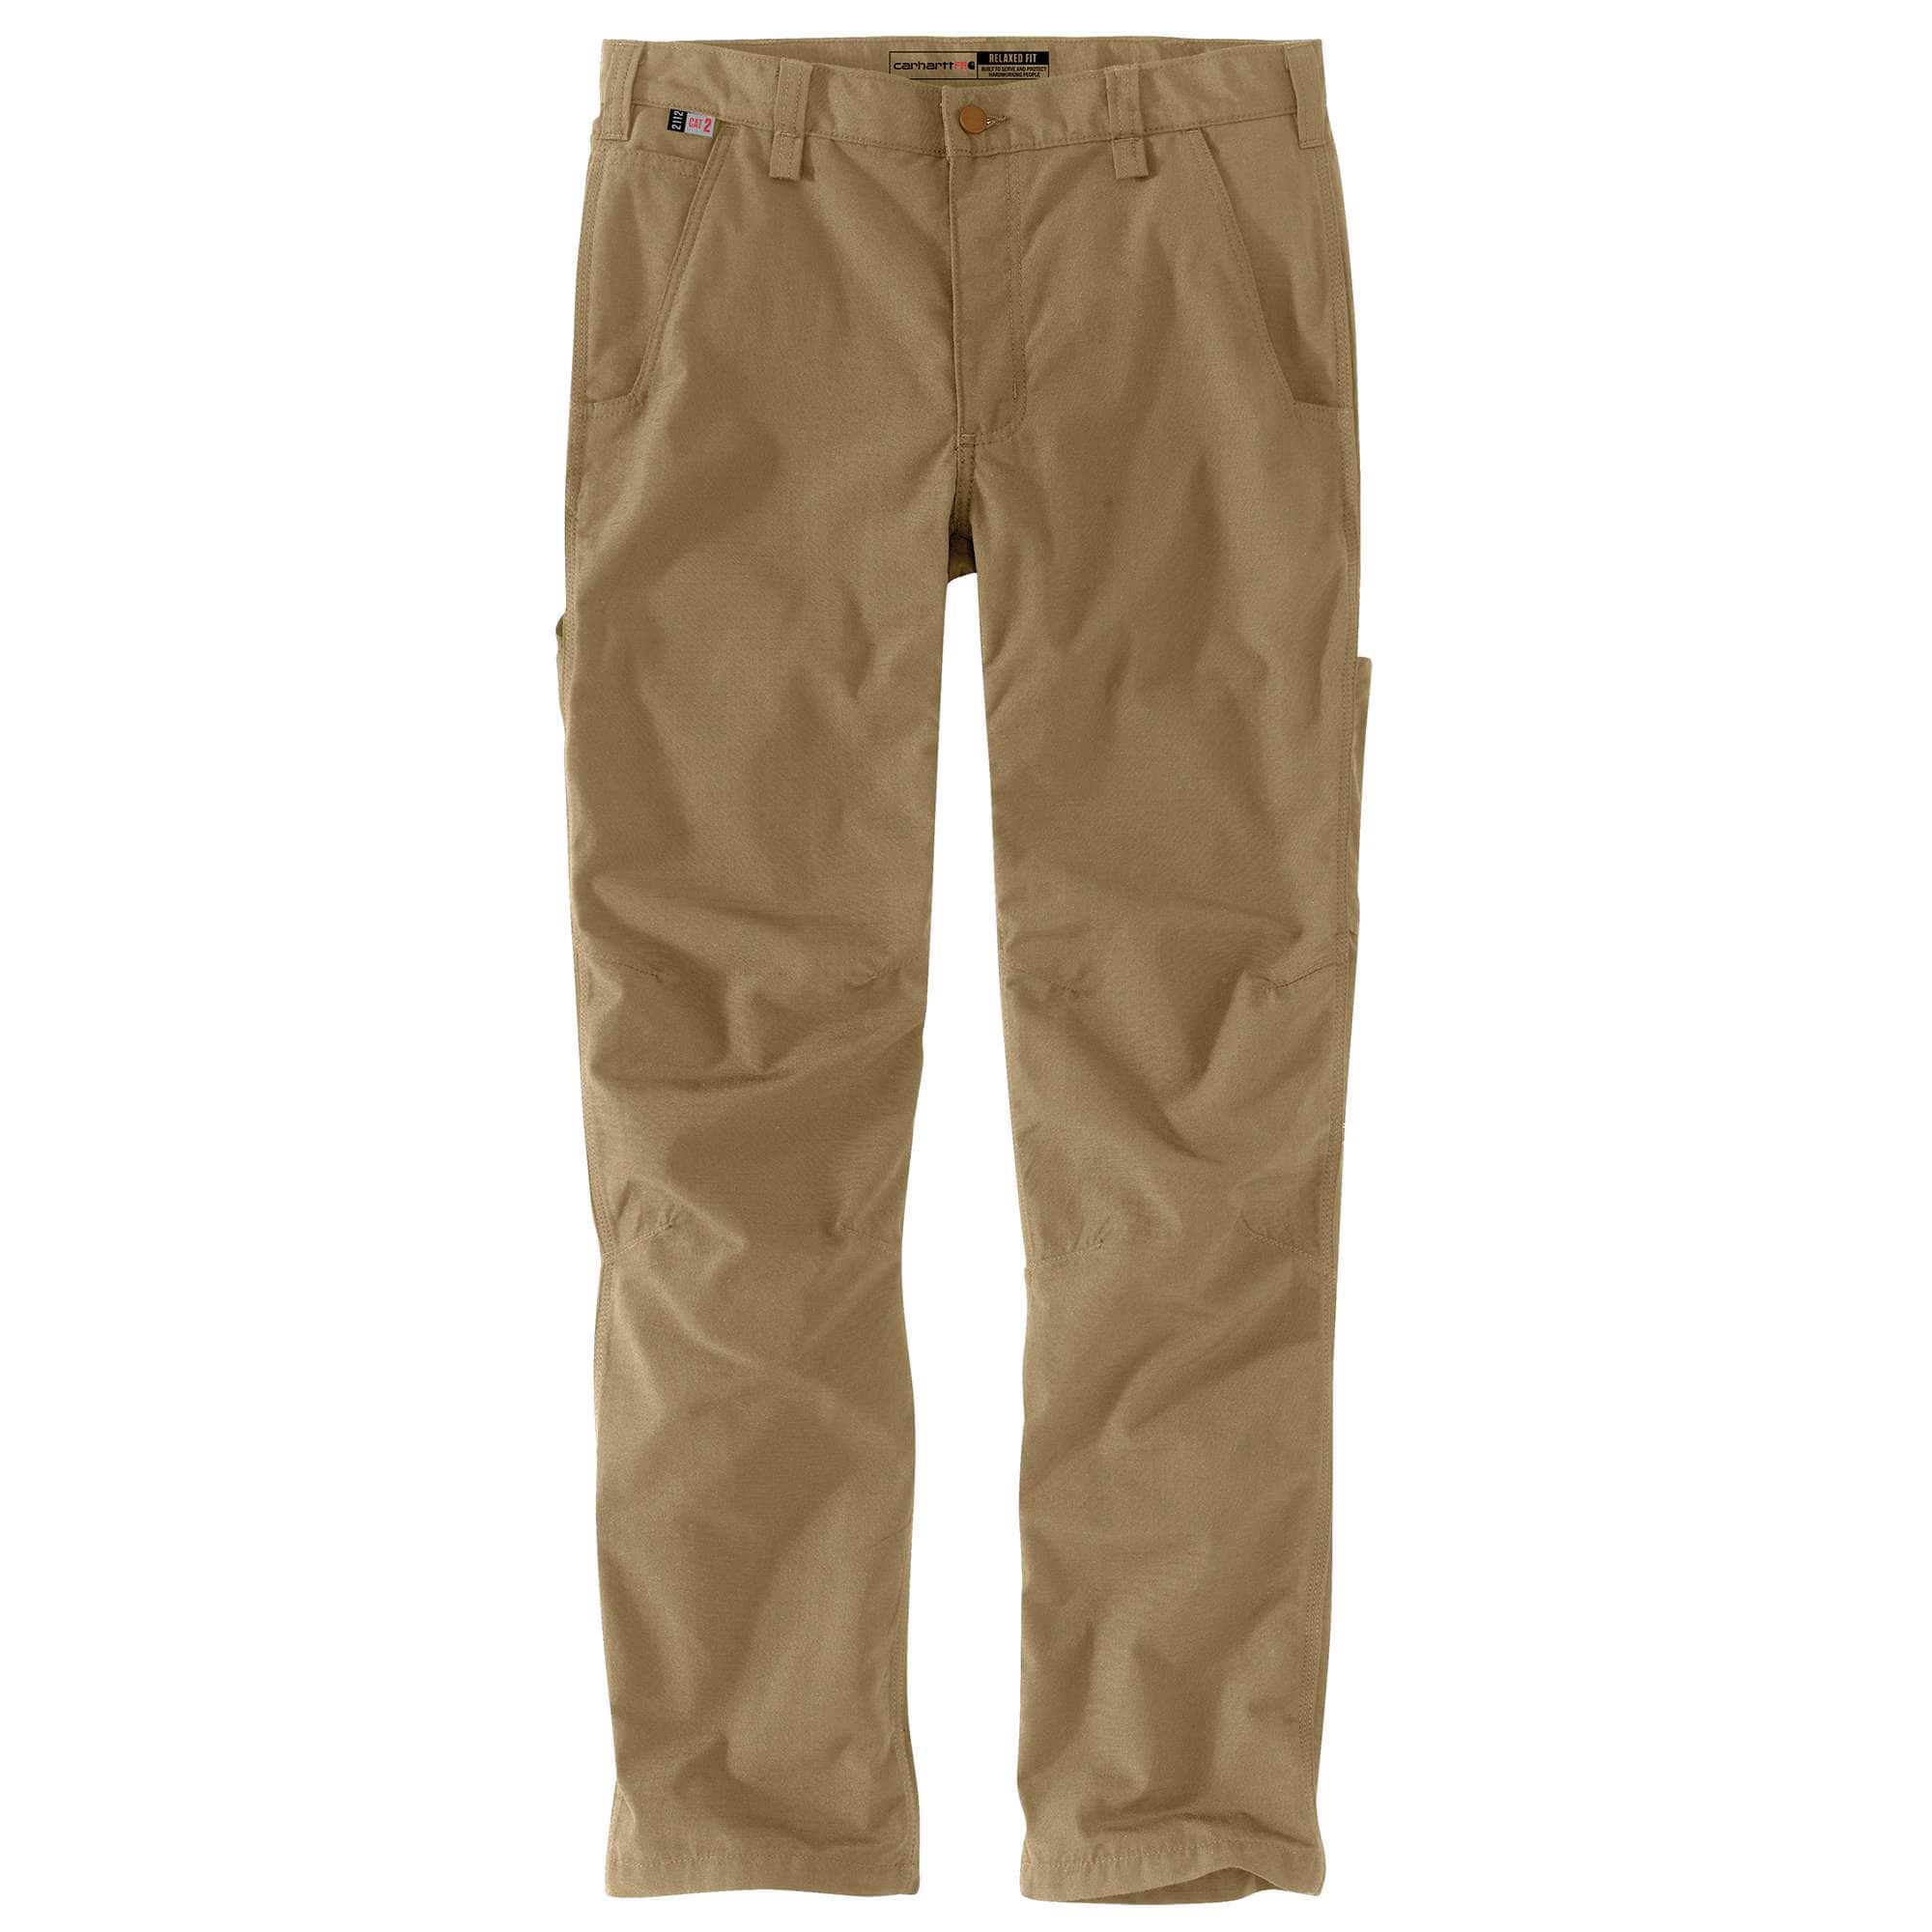 Carhartt FR Rugged Flex Relaxed Fit Canvas Cargo Pant, Navy